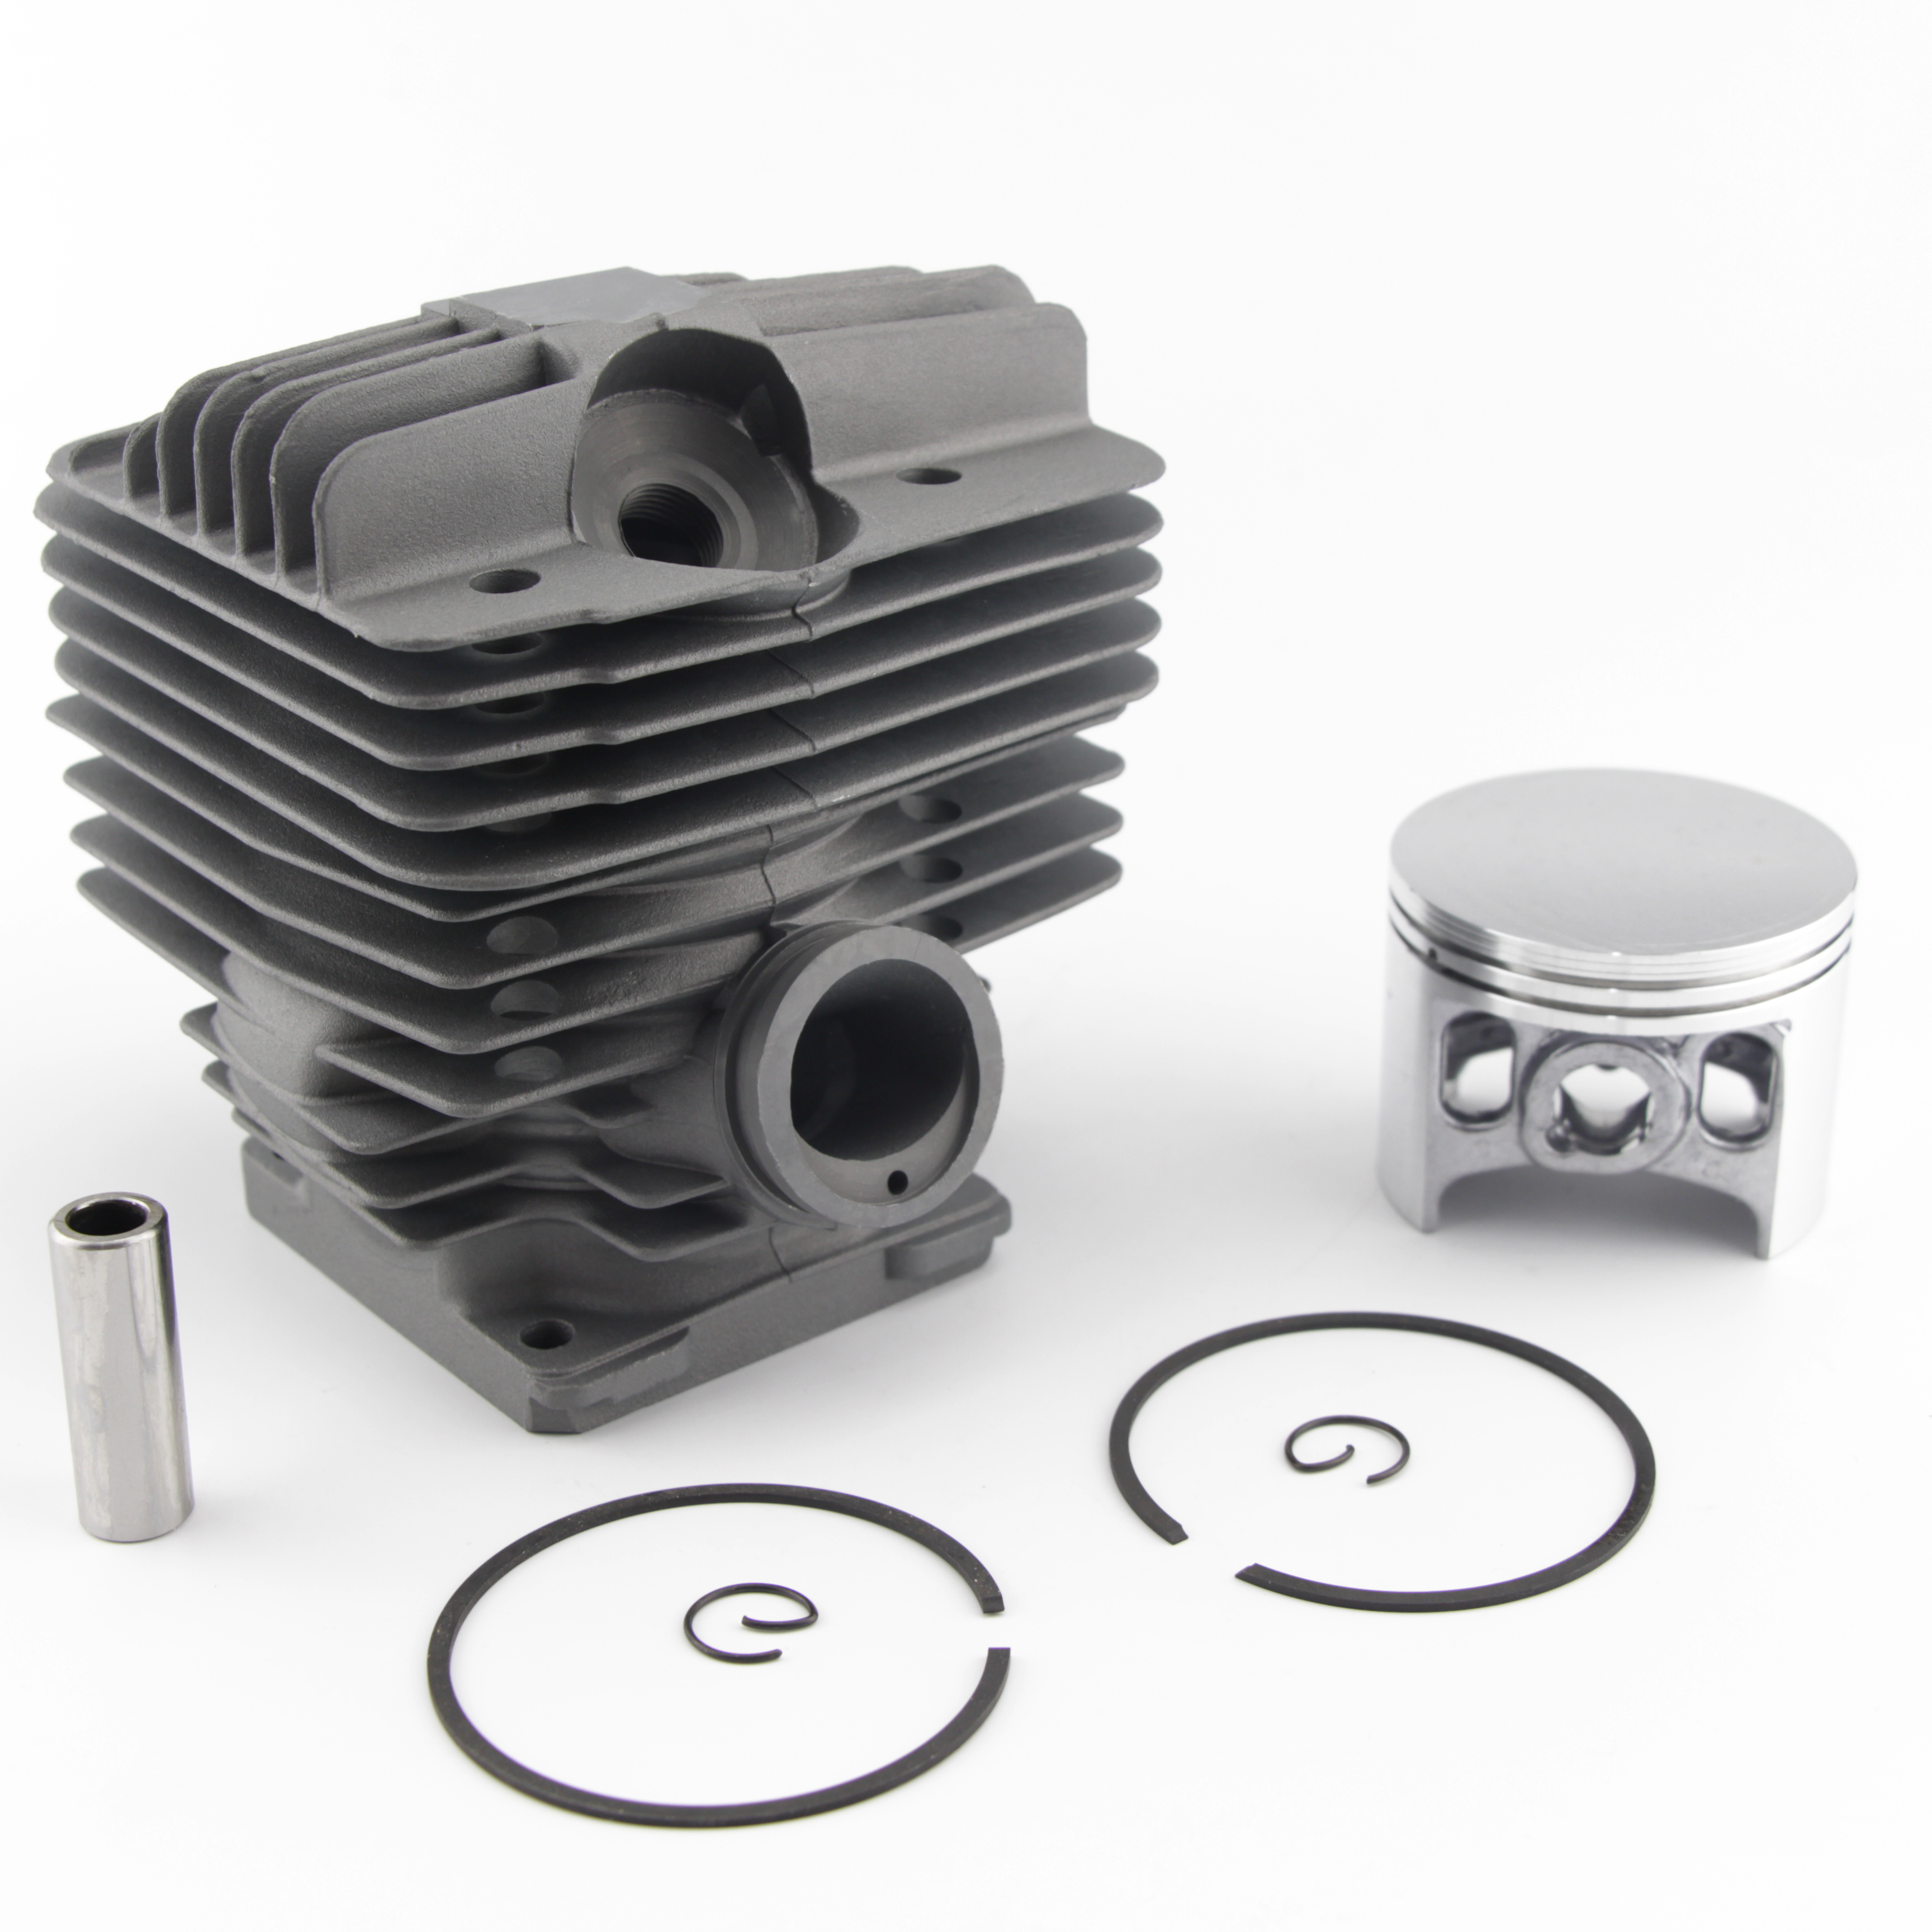 Details about   60MM Cylinder Piston Kit For Stihl 088 MS880 Chainsaw 1124 020 1209 With Pin Rin